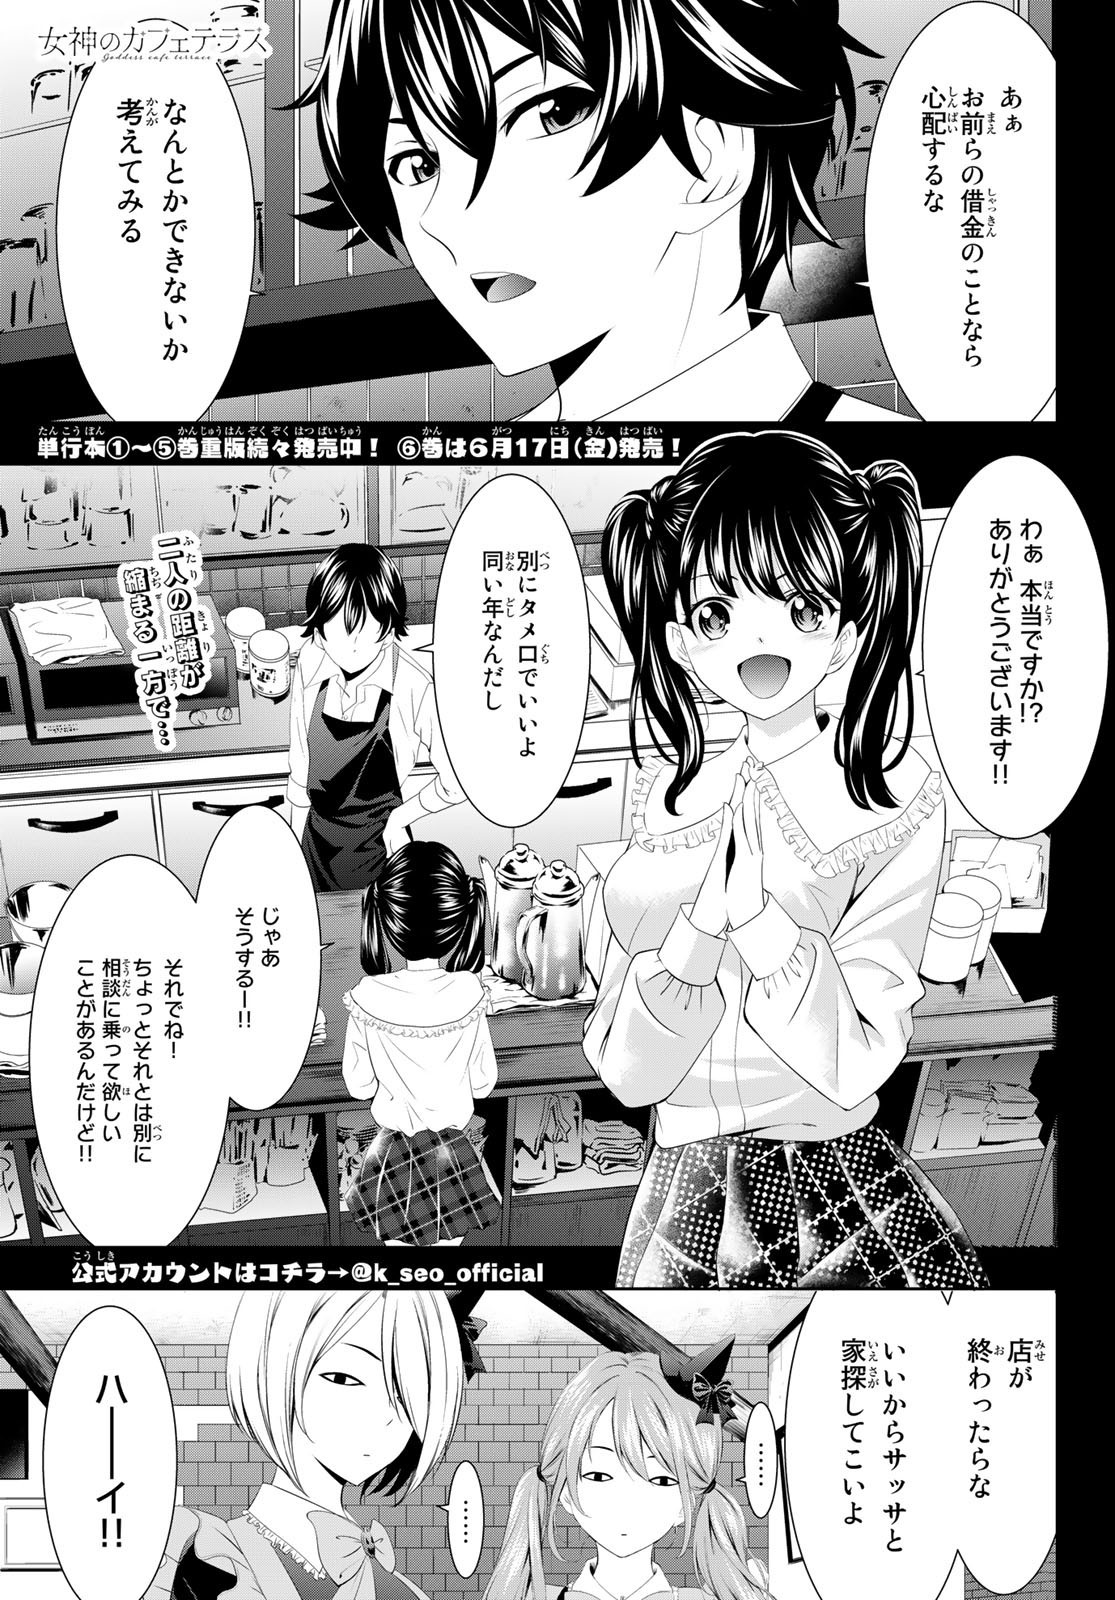 Goddess-Cafe-Terrace - Chapter 056 - Page 1